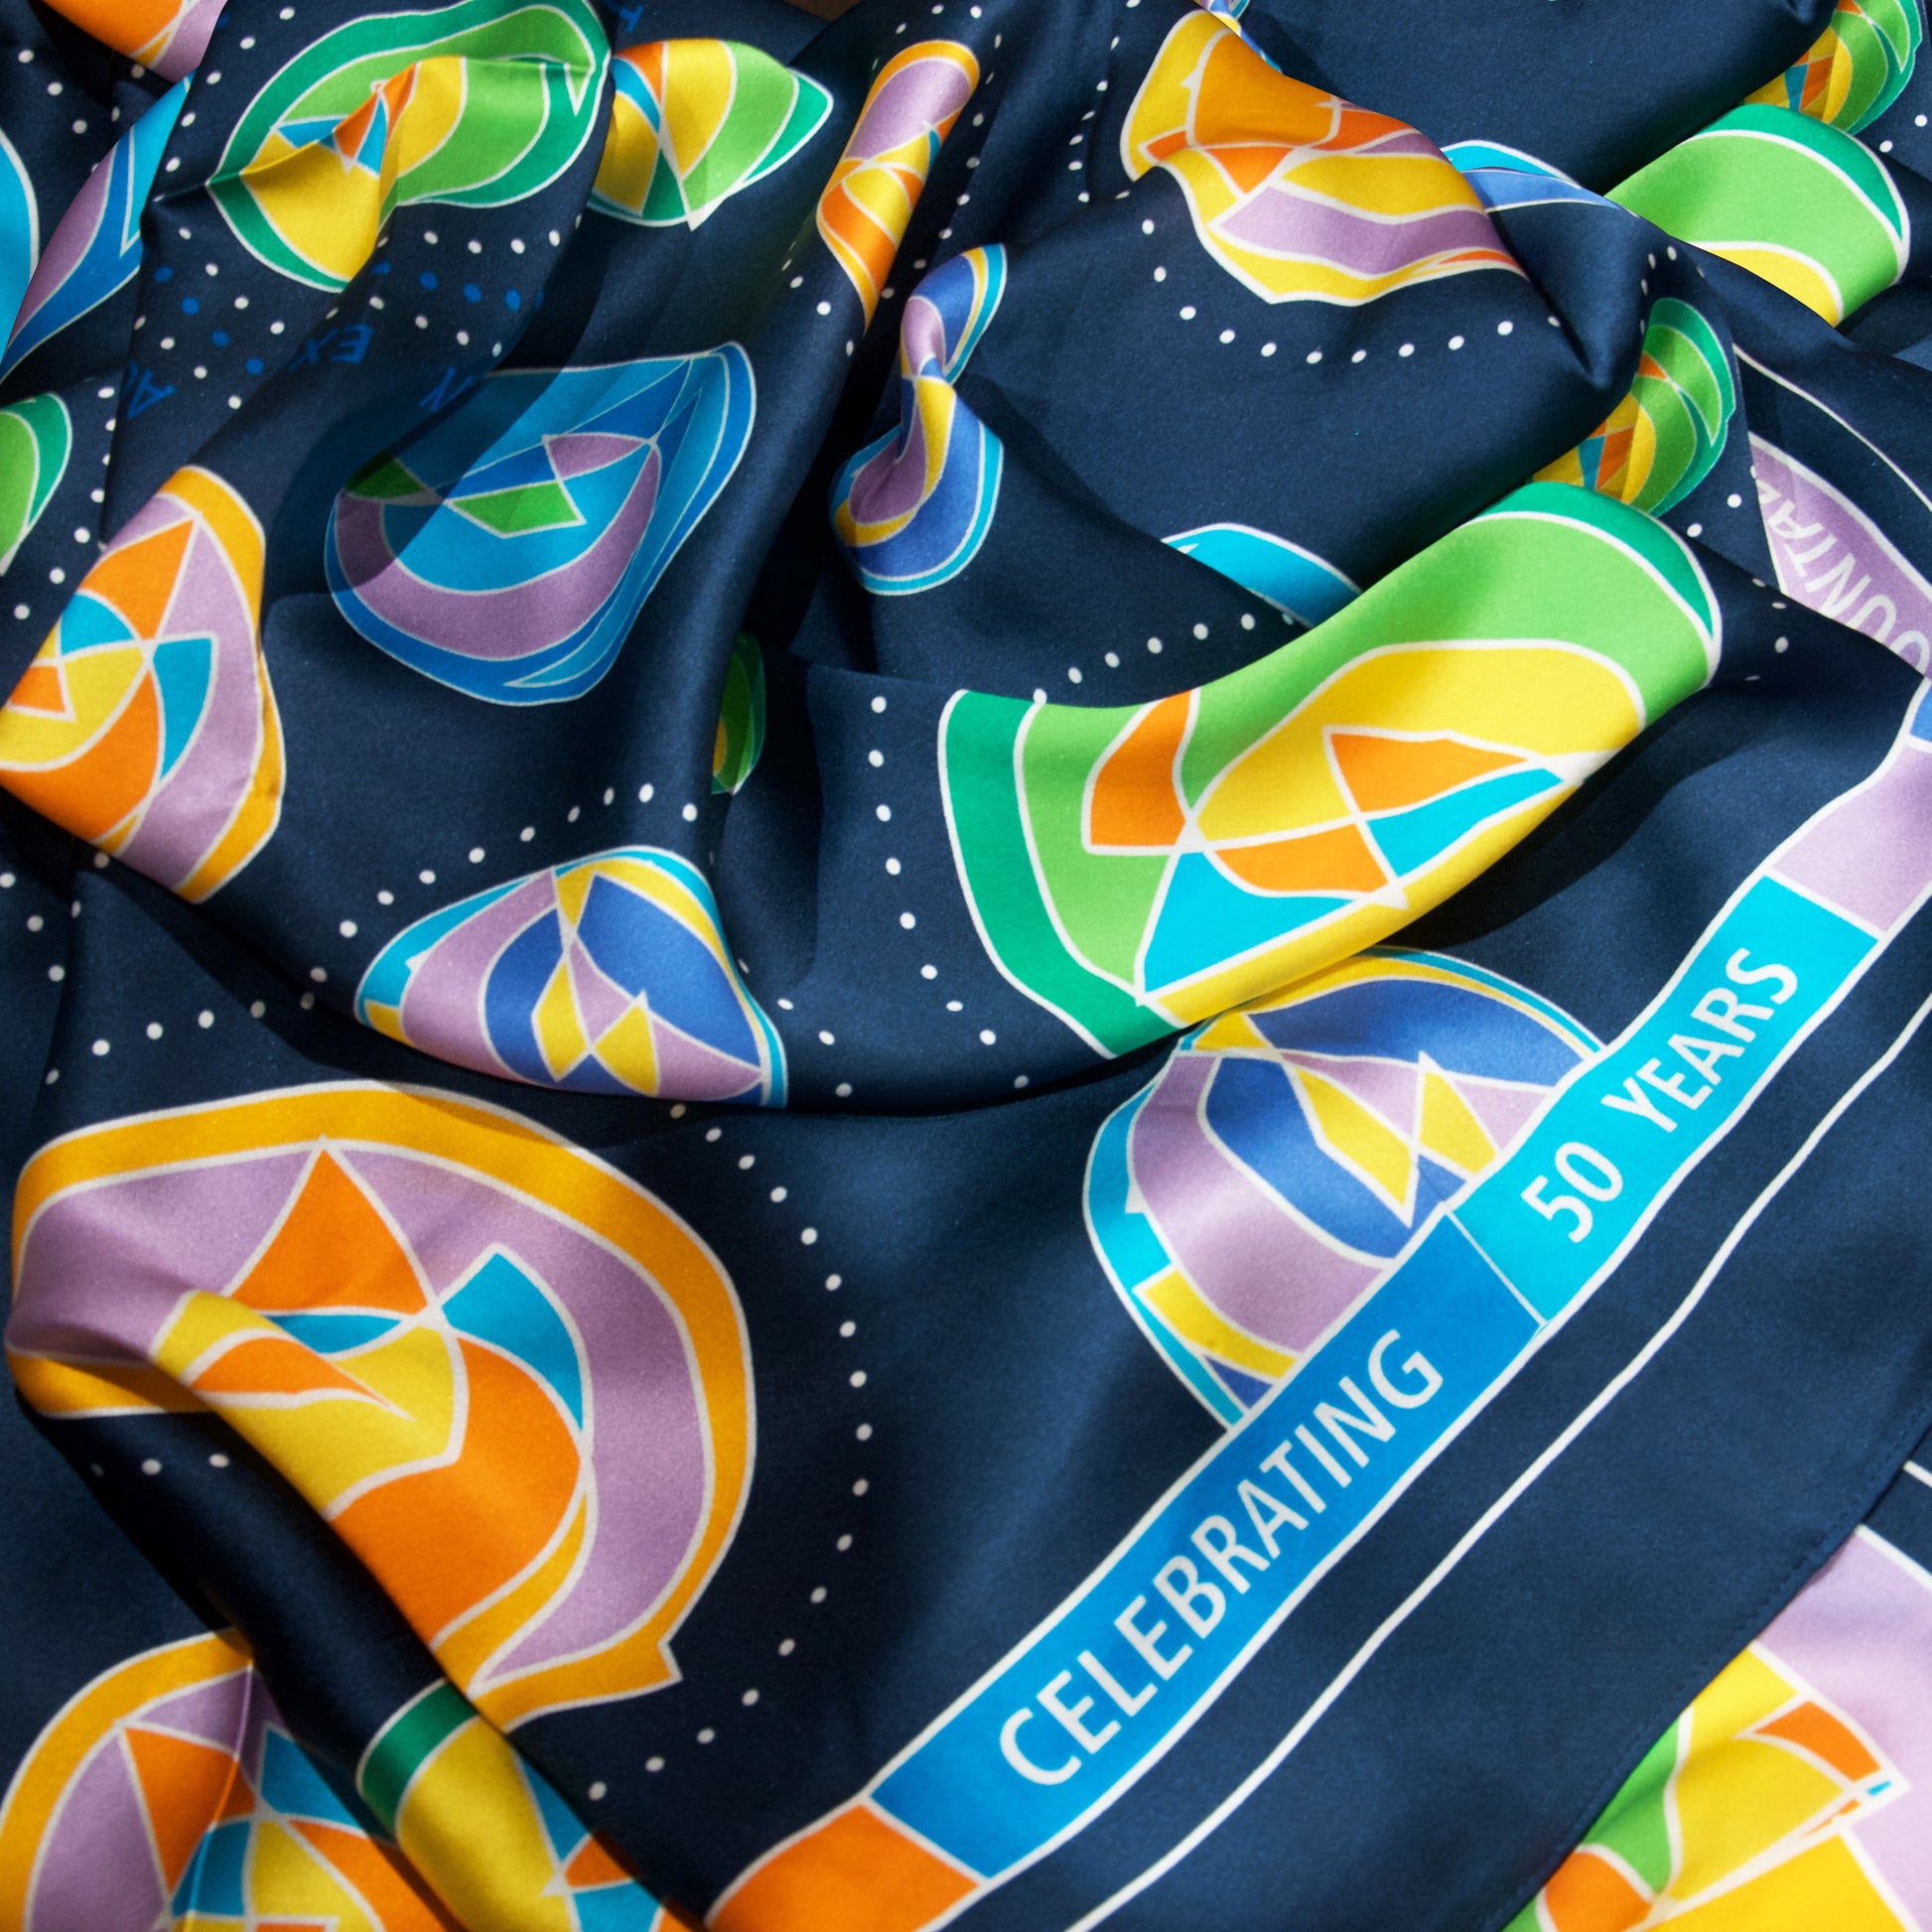 close up of GBC 50th Pathways Silk Scarf, showing the celebrating 50 years text